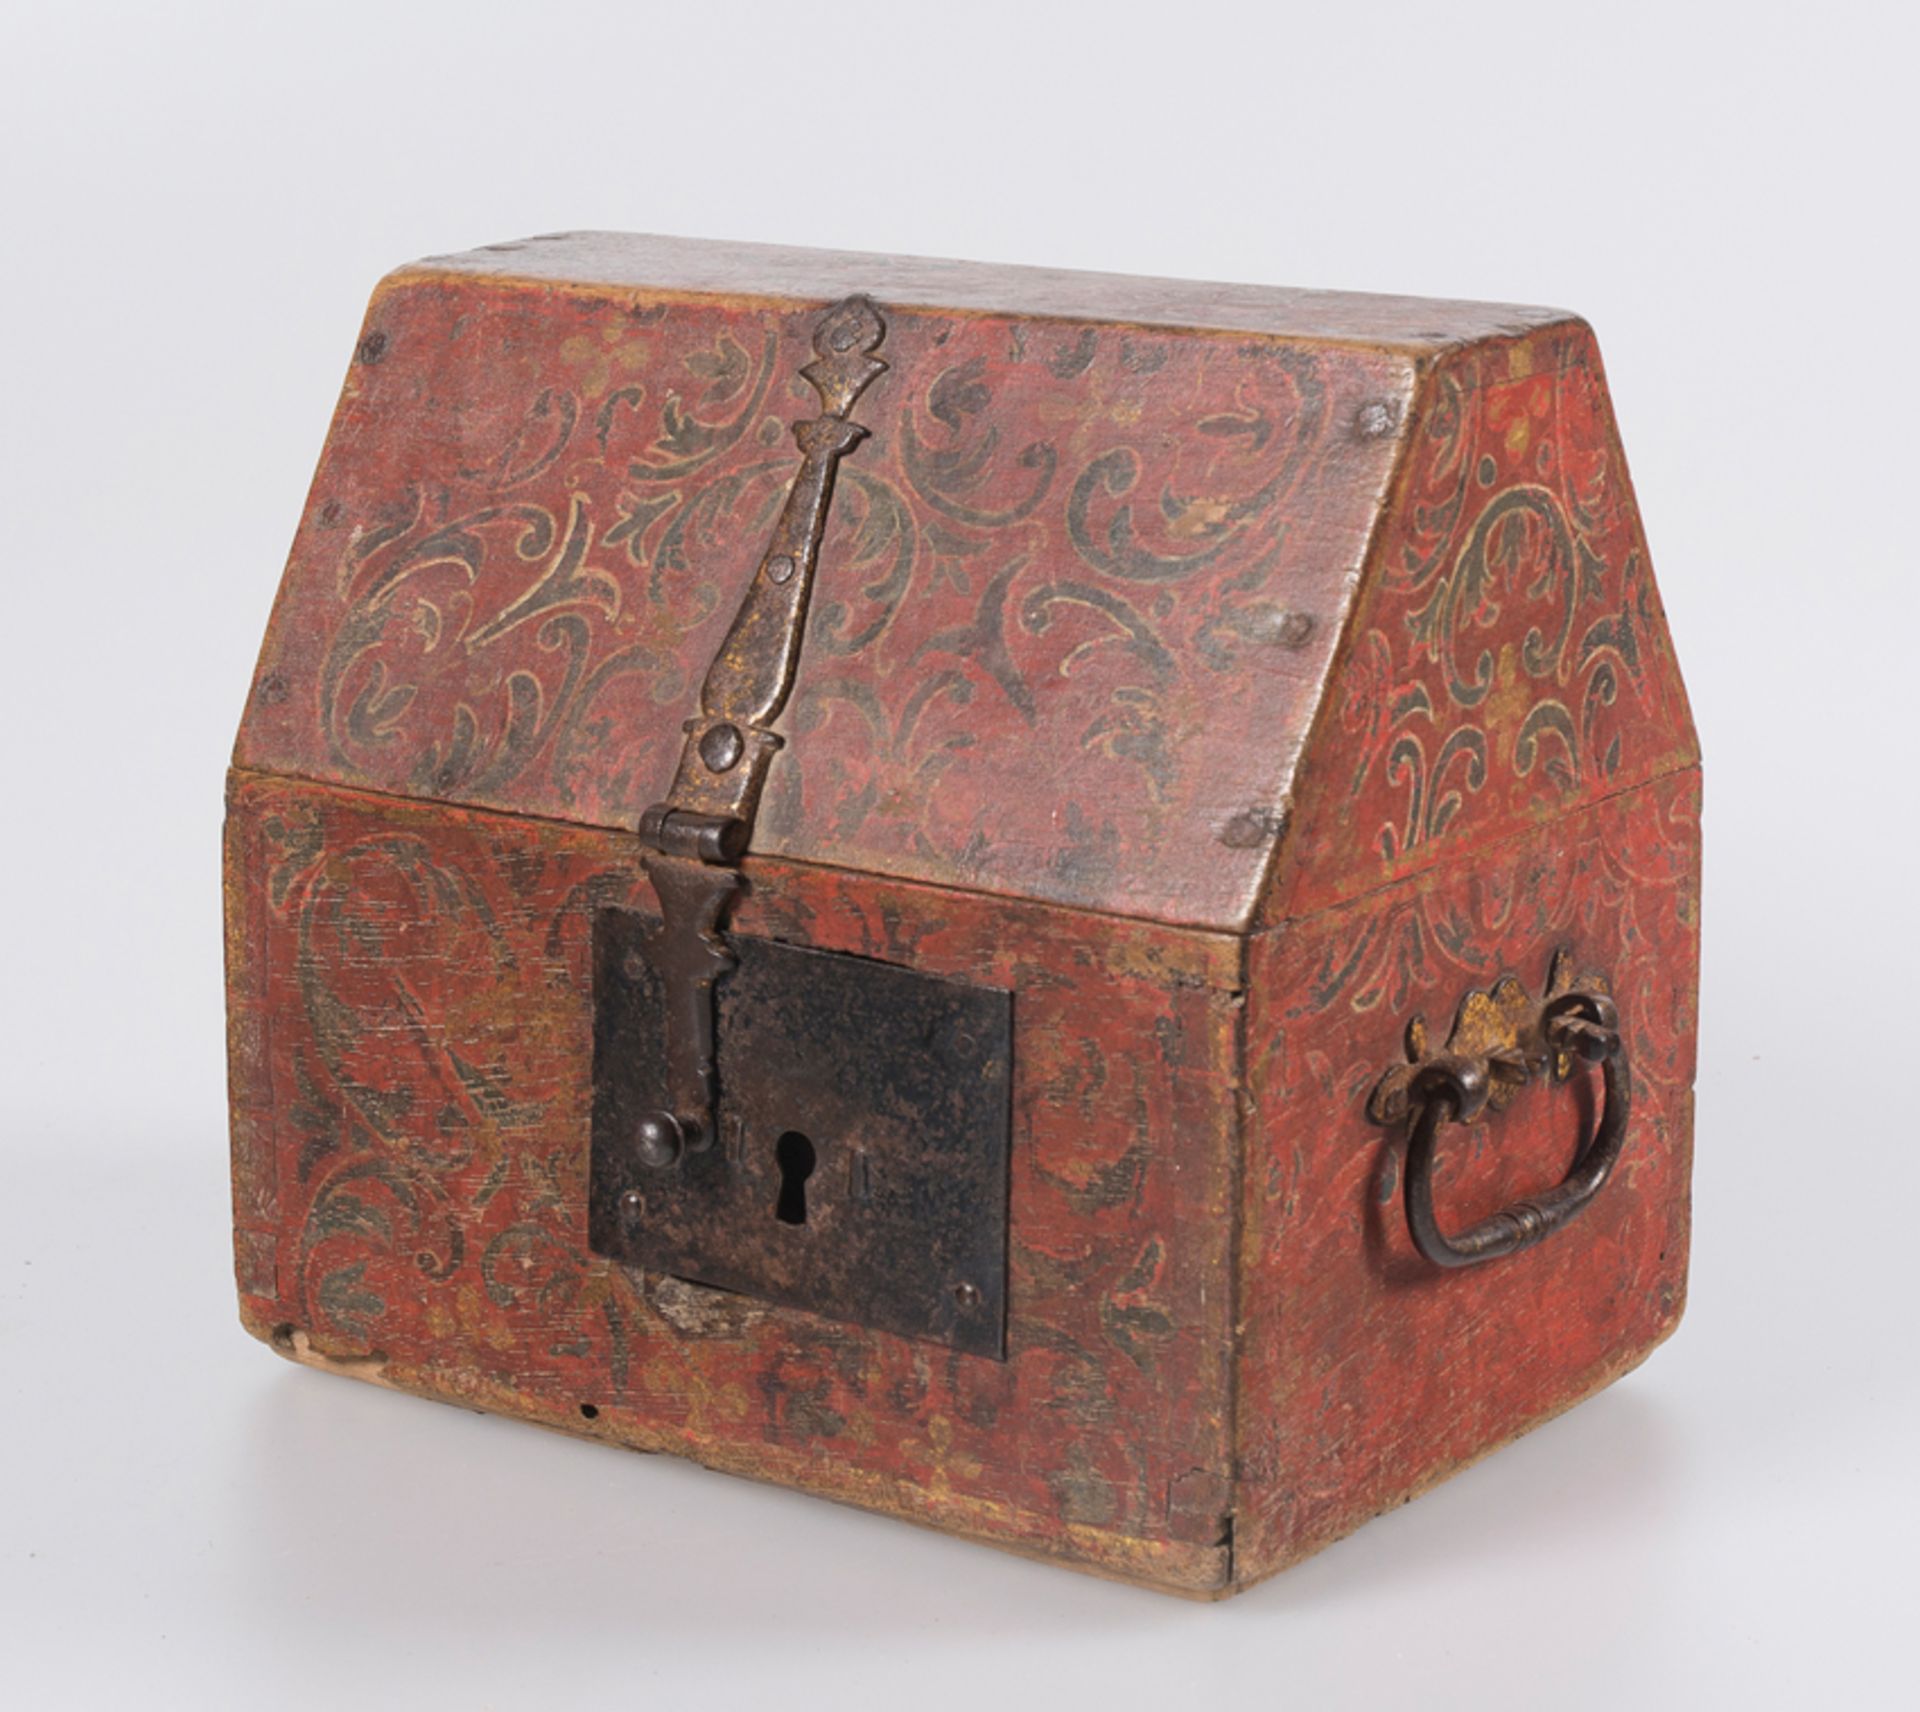 Carved and polychromed wooden chest with gilded, wrought iron fittings. Early Renaissance. Circa 1